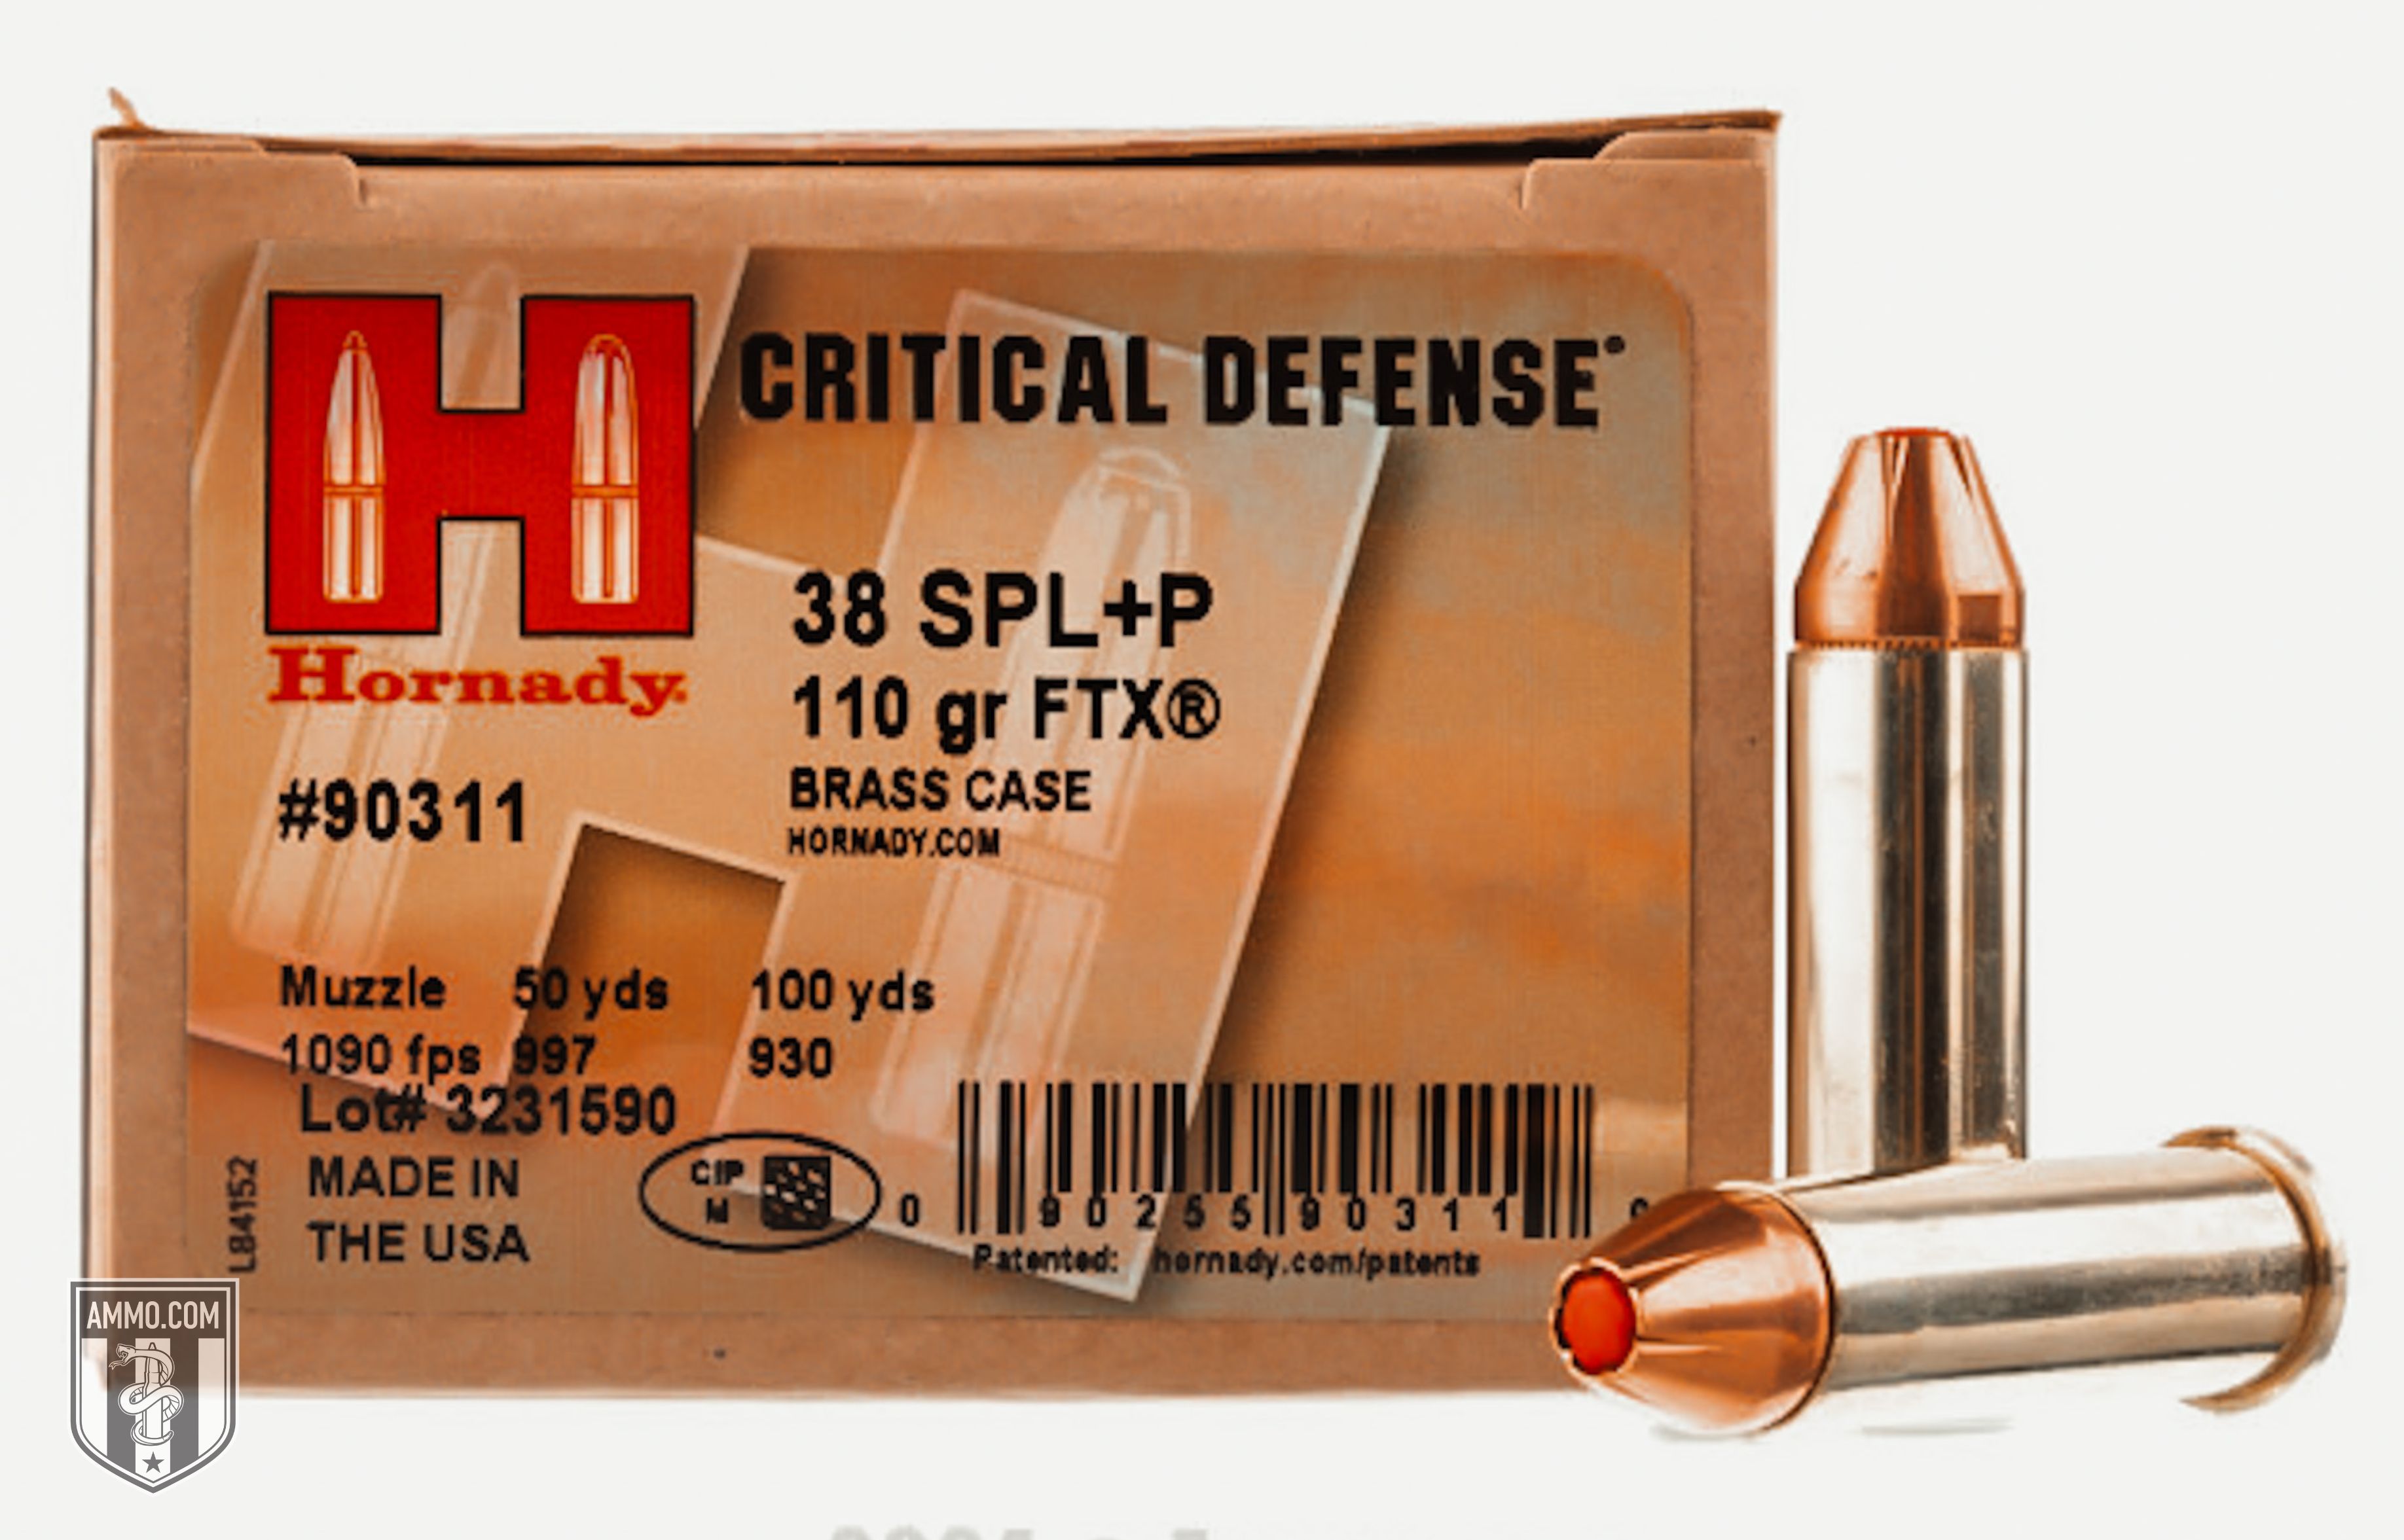 Hornady Critical Defense 38 Special +P ammo for sale